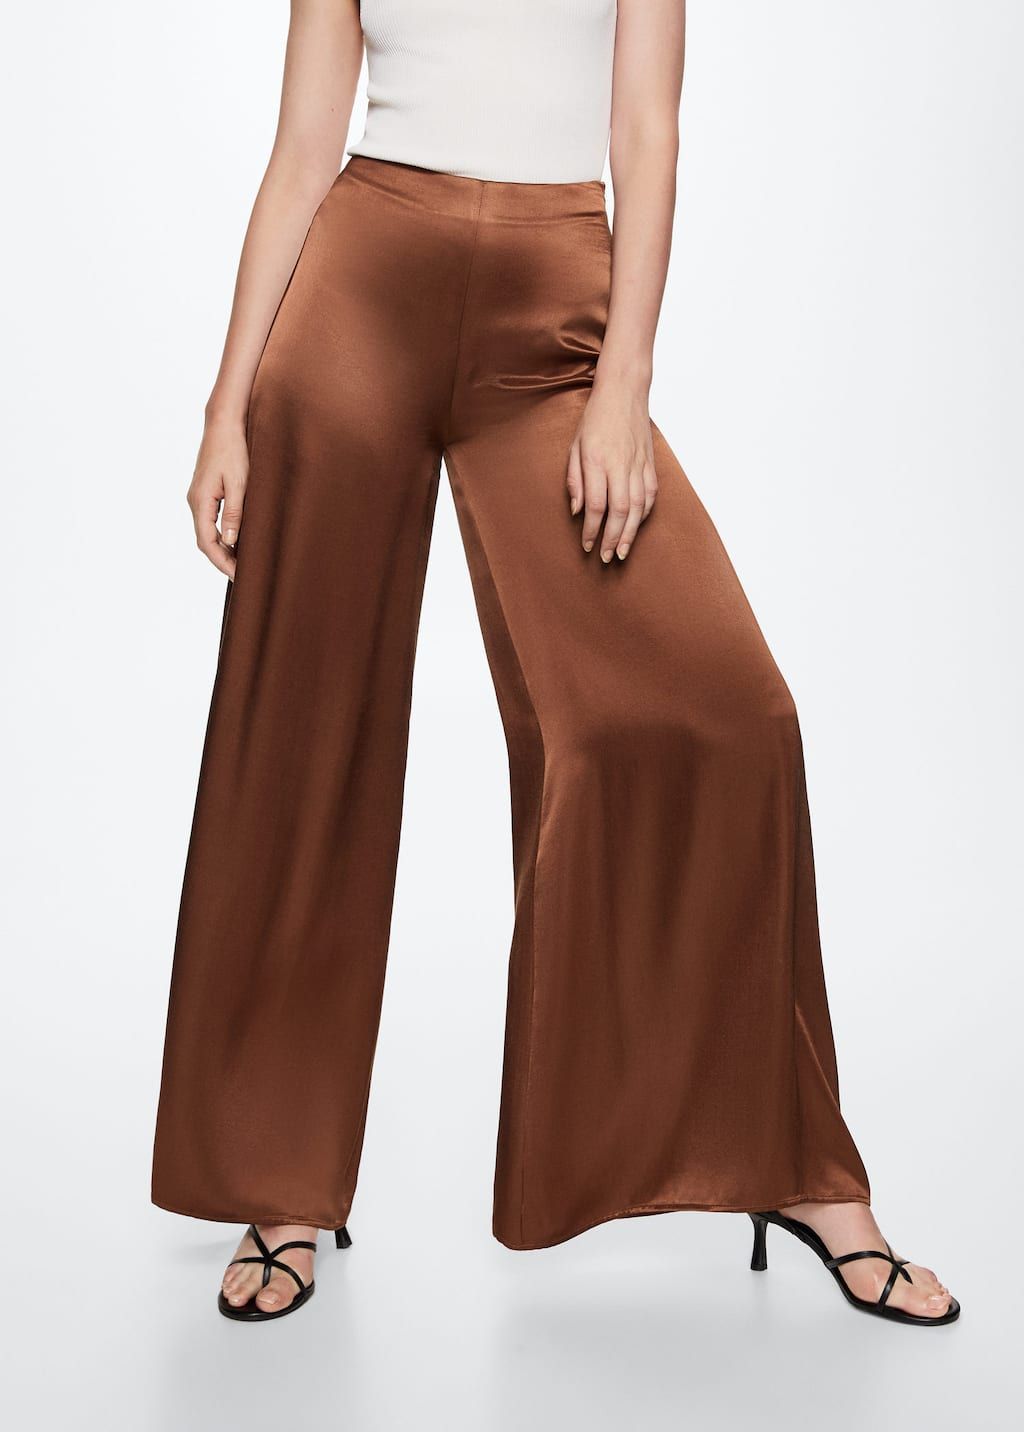 Floral palazzo trousers - Woman | MANGO OUTLET Armenia